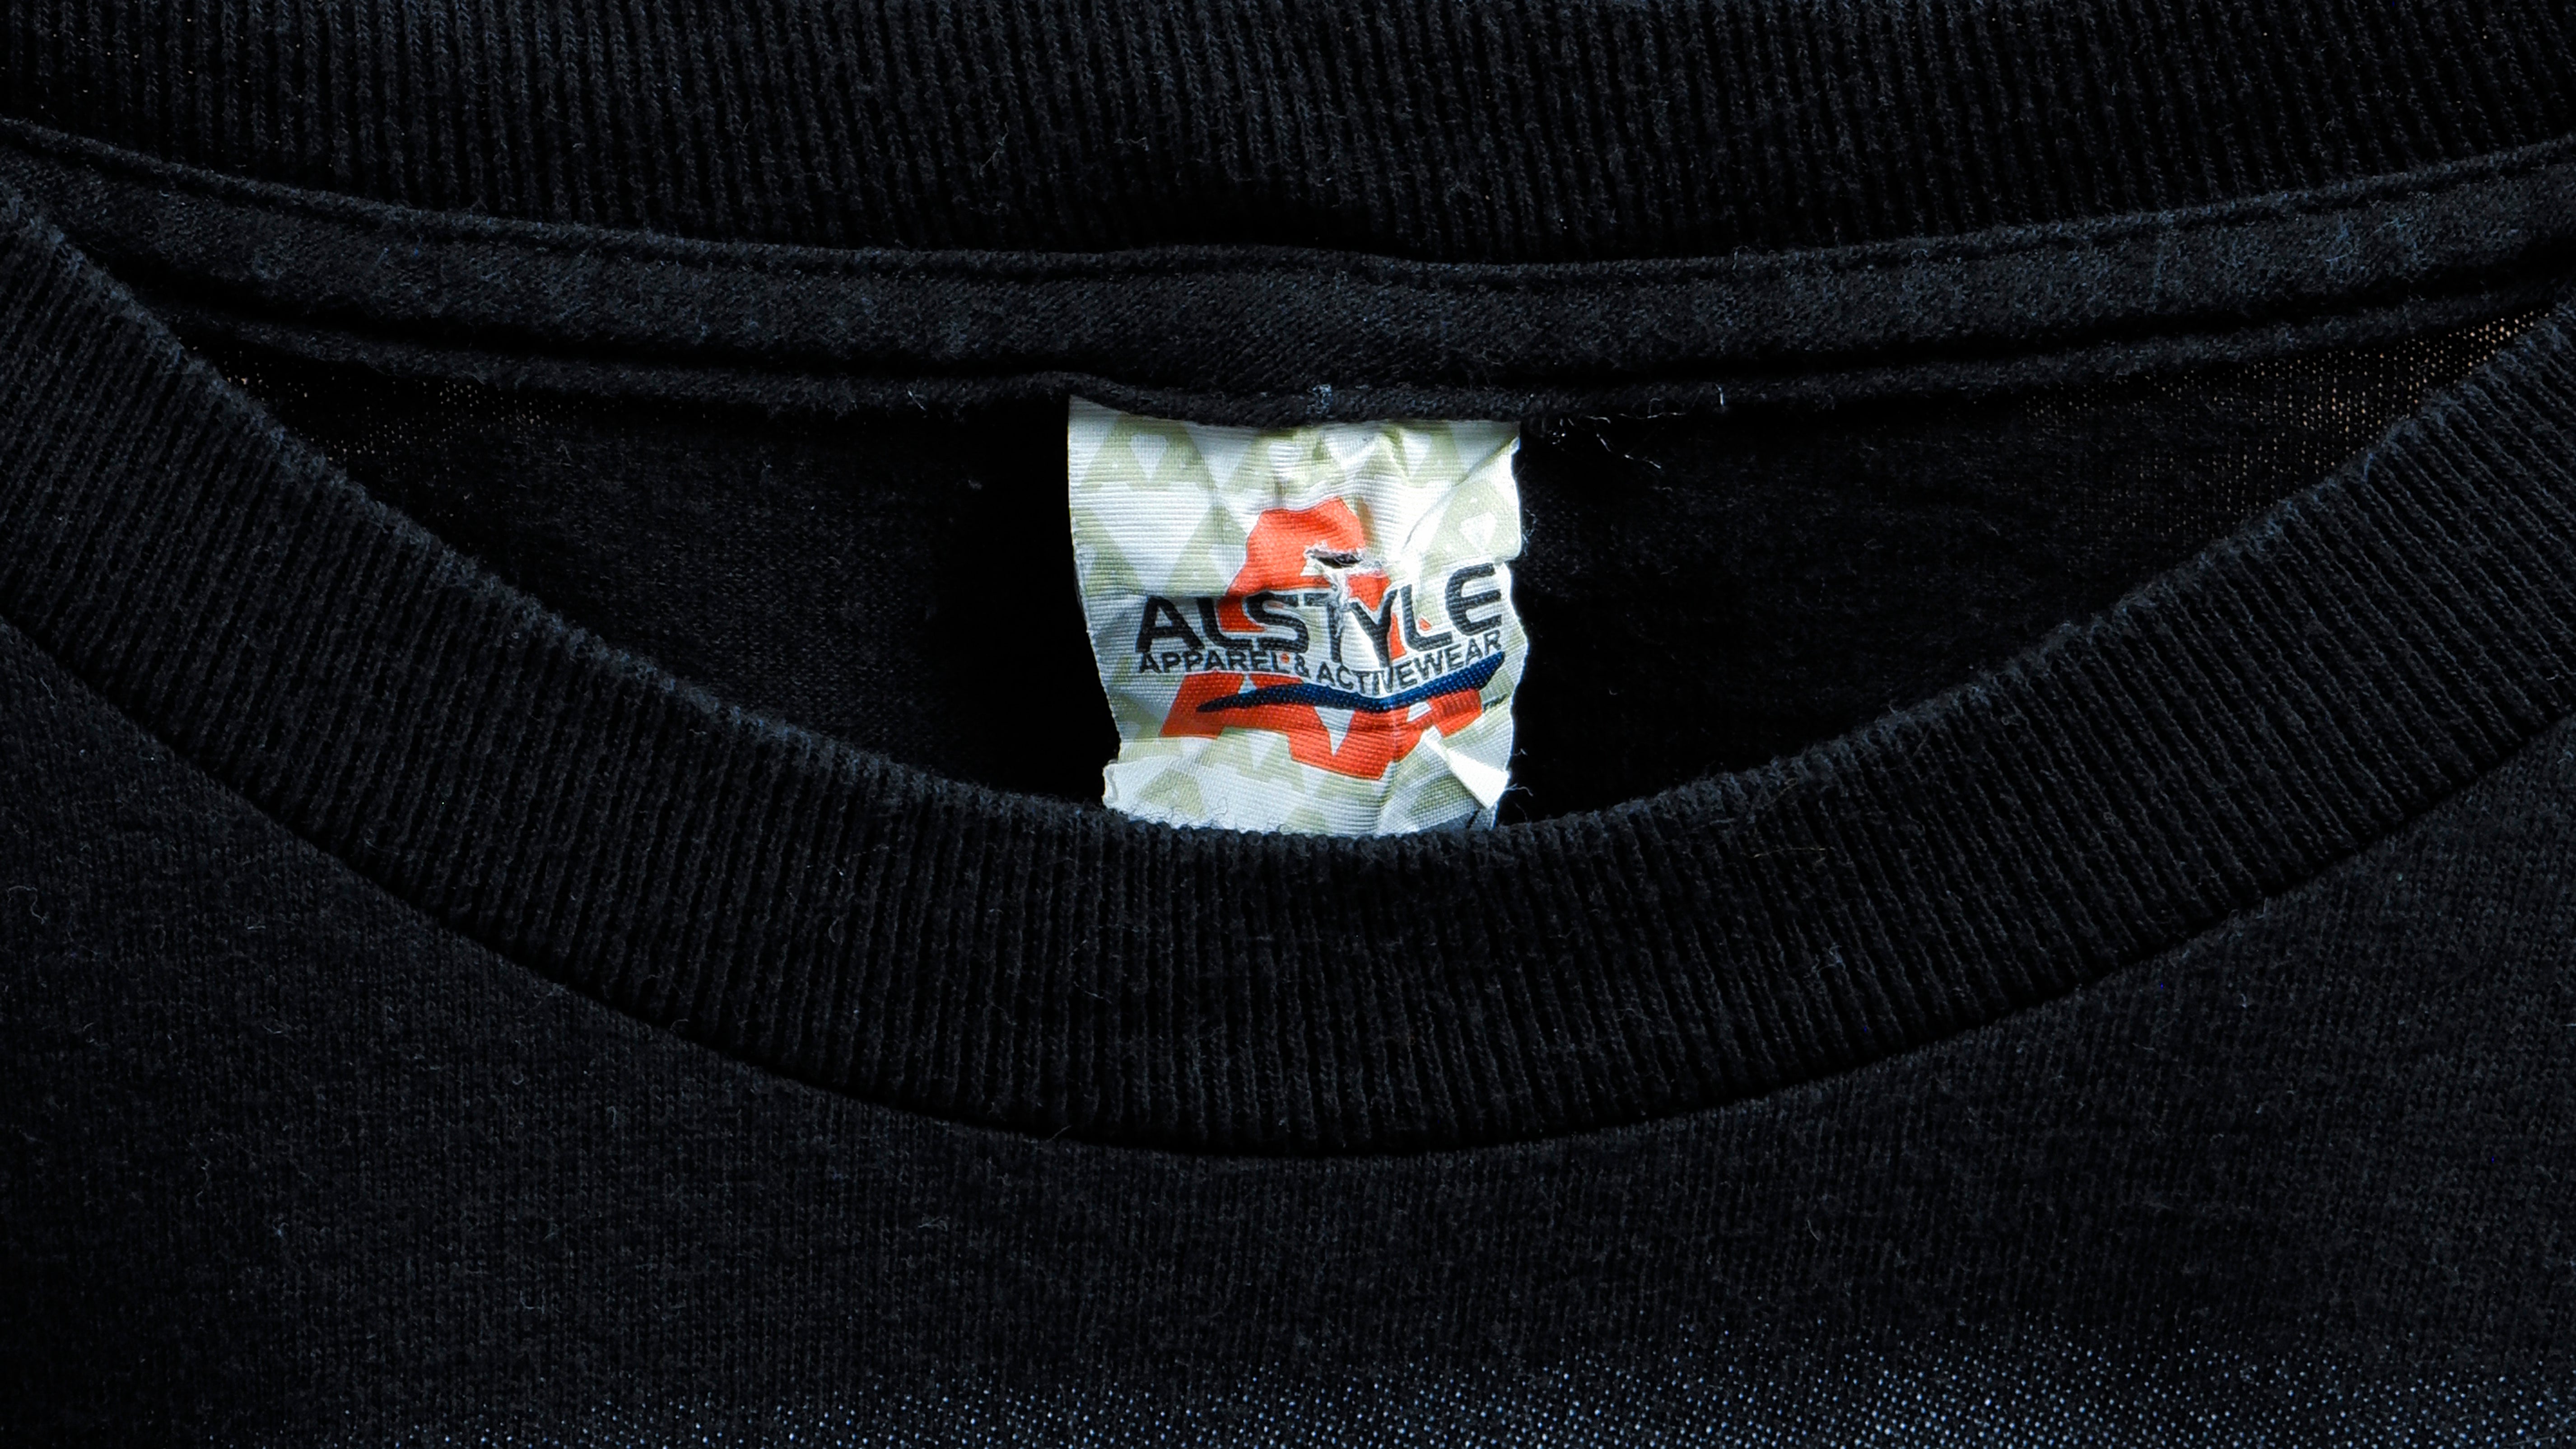 Alstyle Apparel Activewear 1990's T Shirt